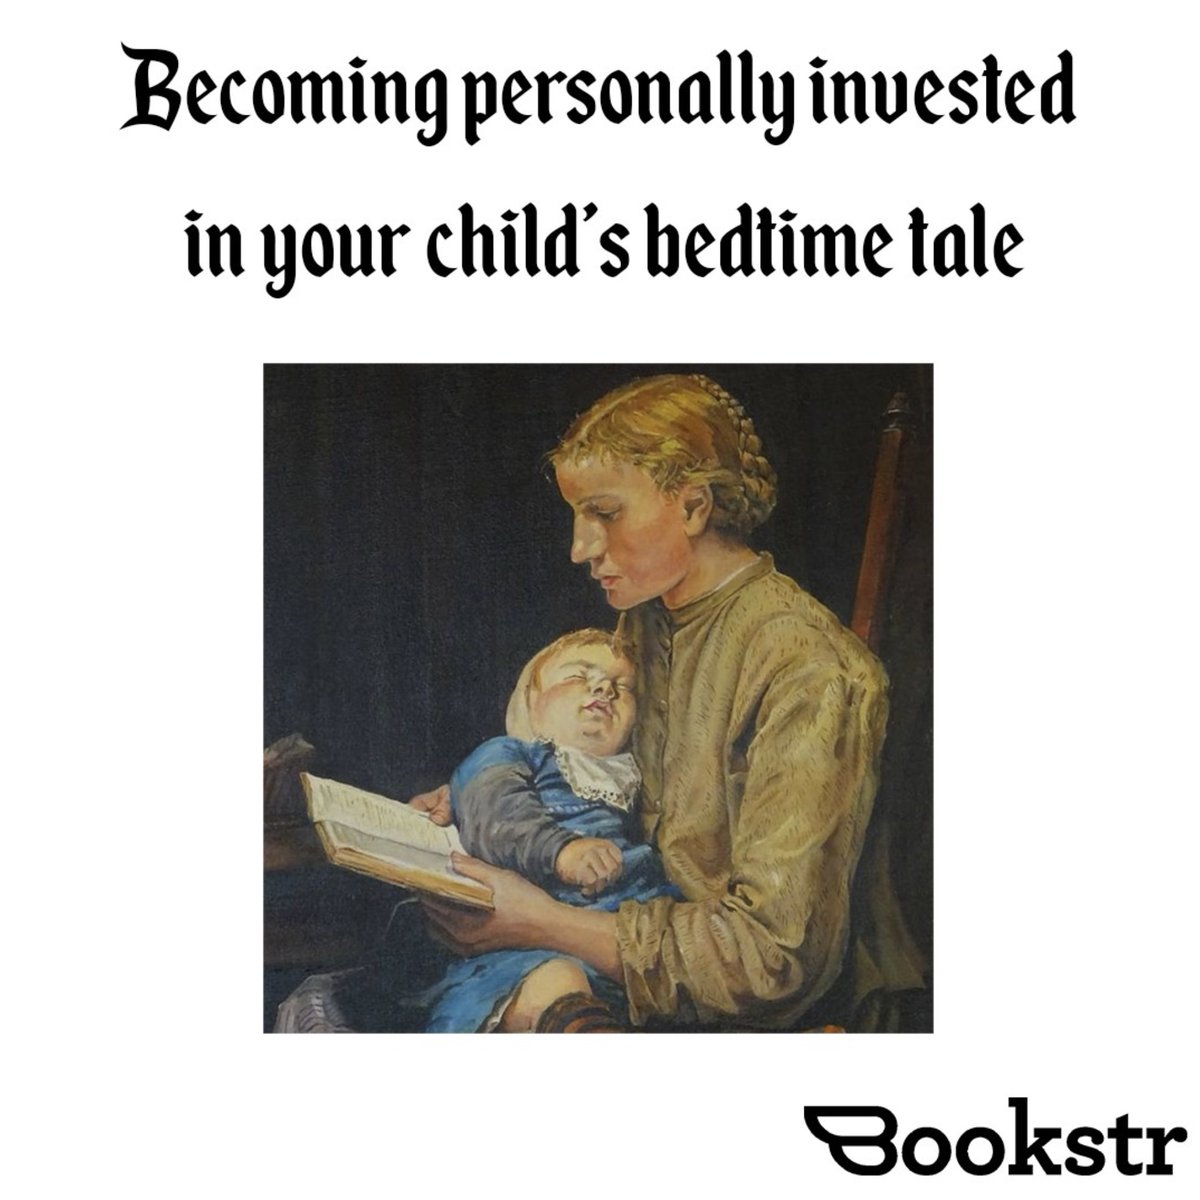 Bedtime stories can be for adults too!

[🤪 Meme by Sam Cosca]

#bookmemes #relatable #bedtimestories